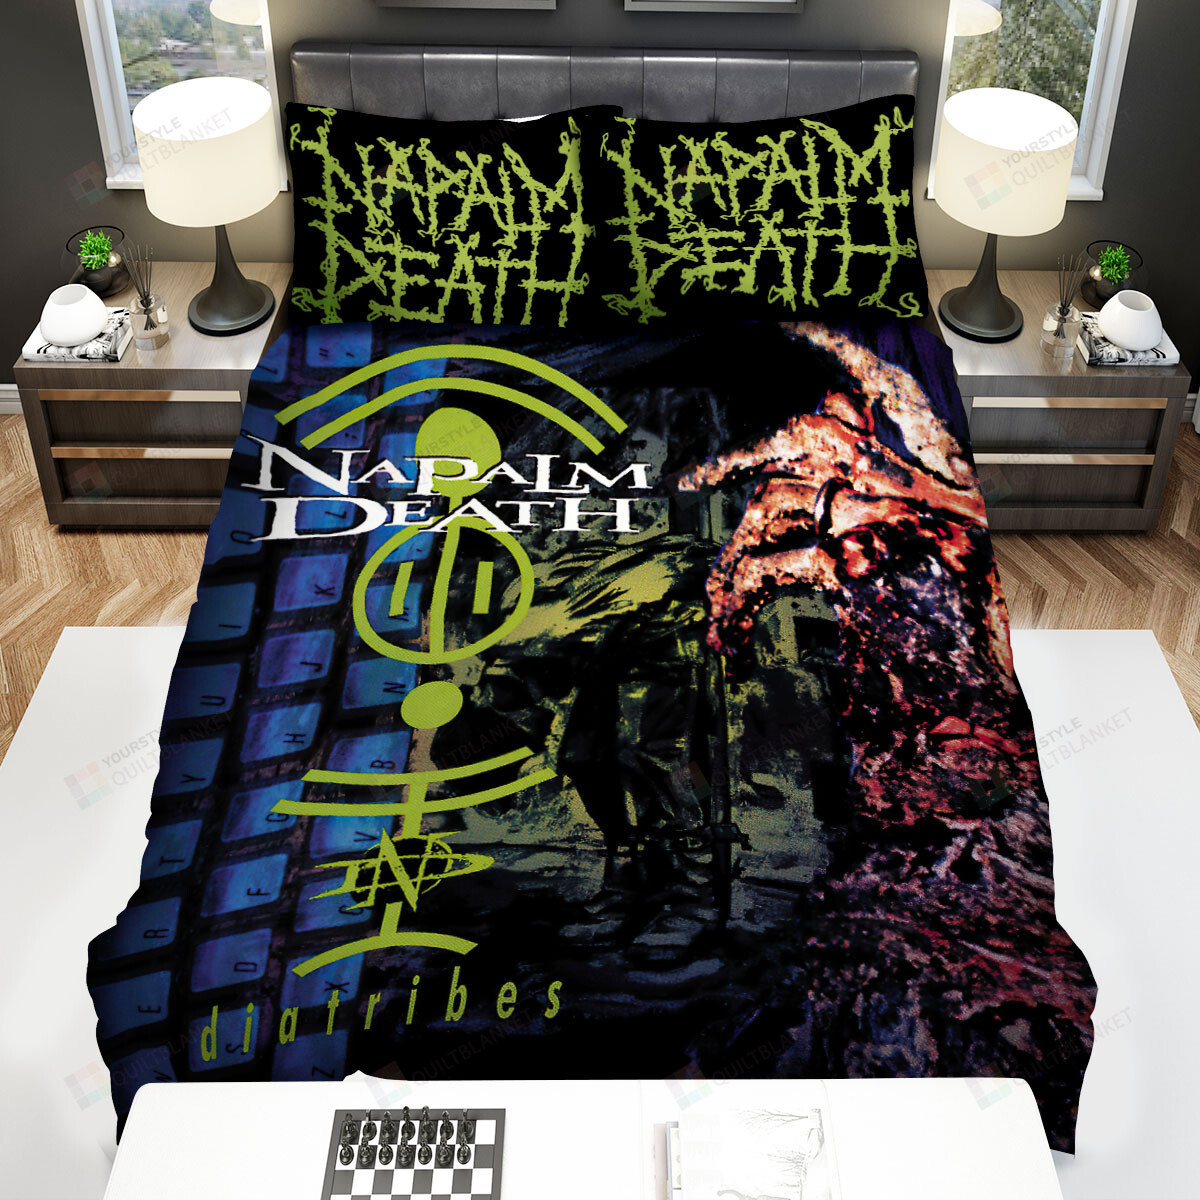 Napalm Death Cover 9 Bed Sheets Spread Comforter Duvet Cover Bedding Sets